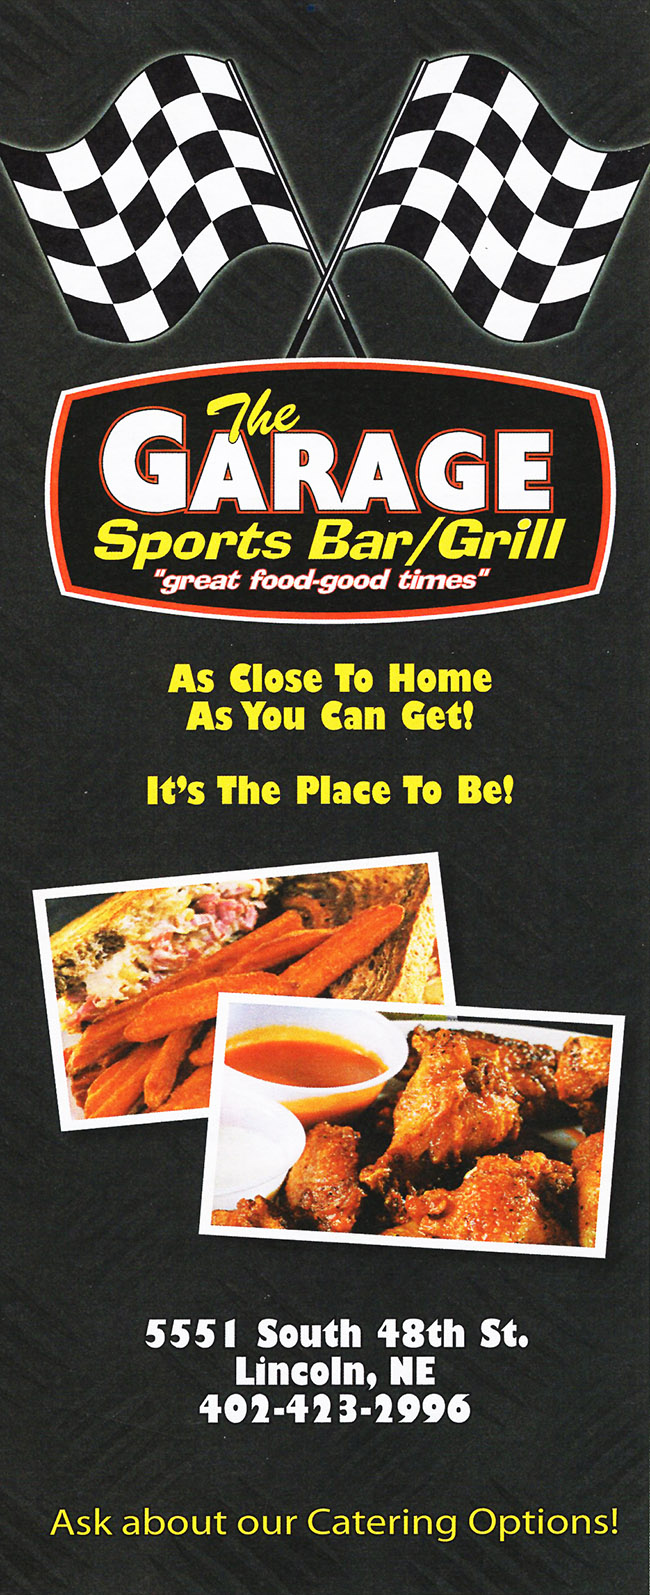 The Garage Sports Bar & Grill Delivery Menu - With Prices ...